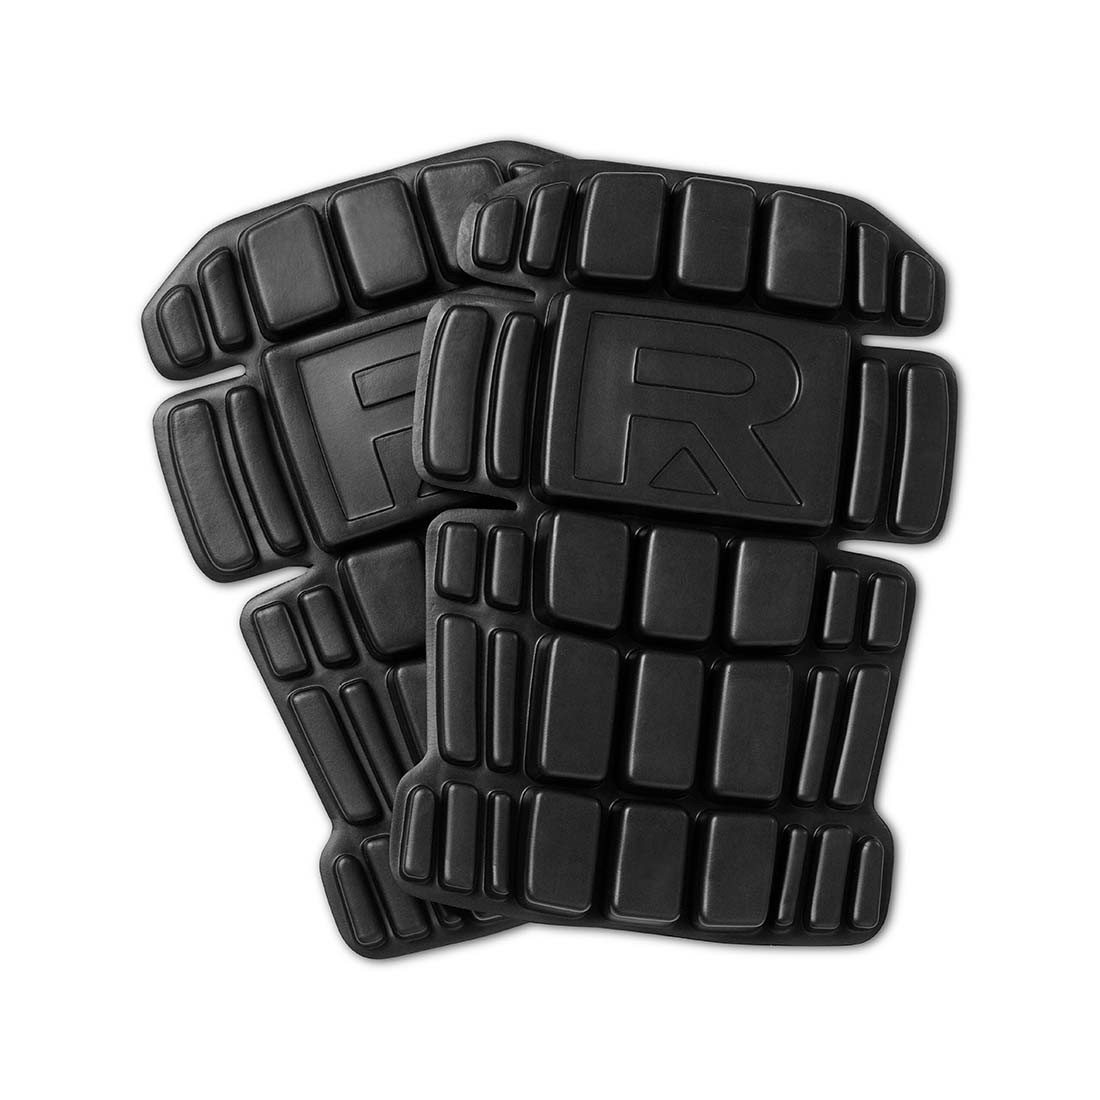 SHIELD Unisex Knee pads - Personal protection